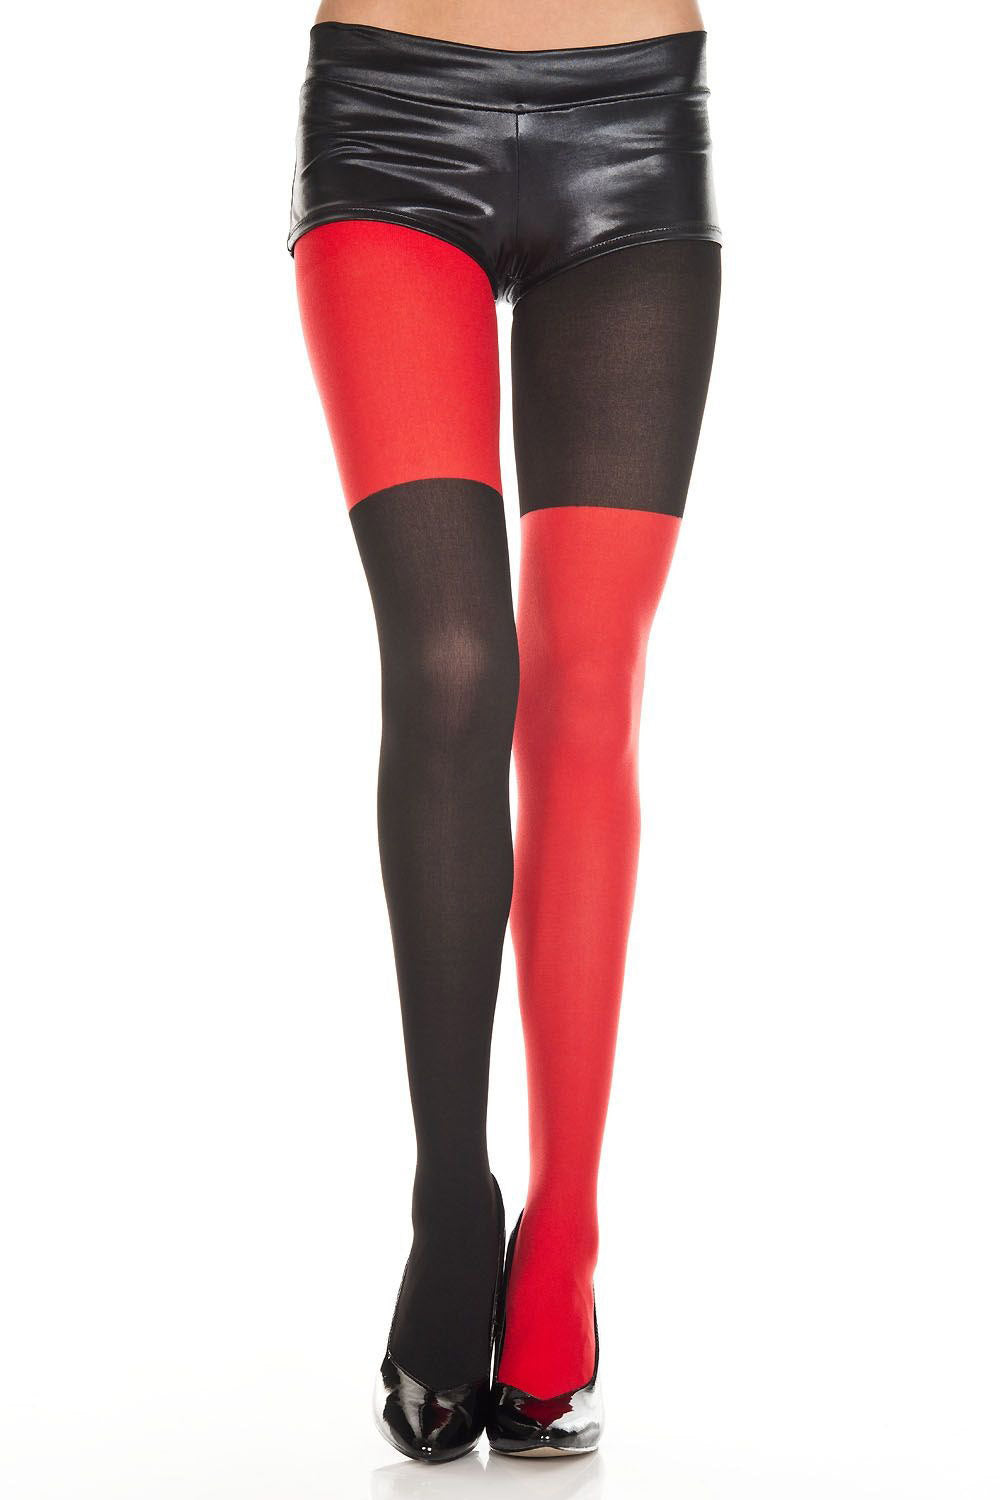 Mismatched Tights [RED/BLACK]